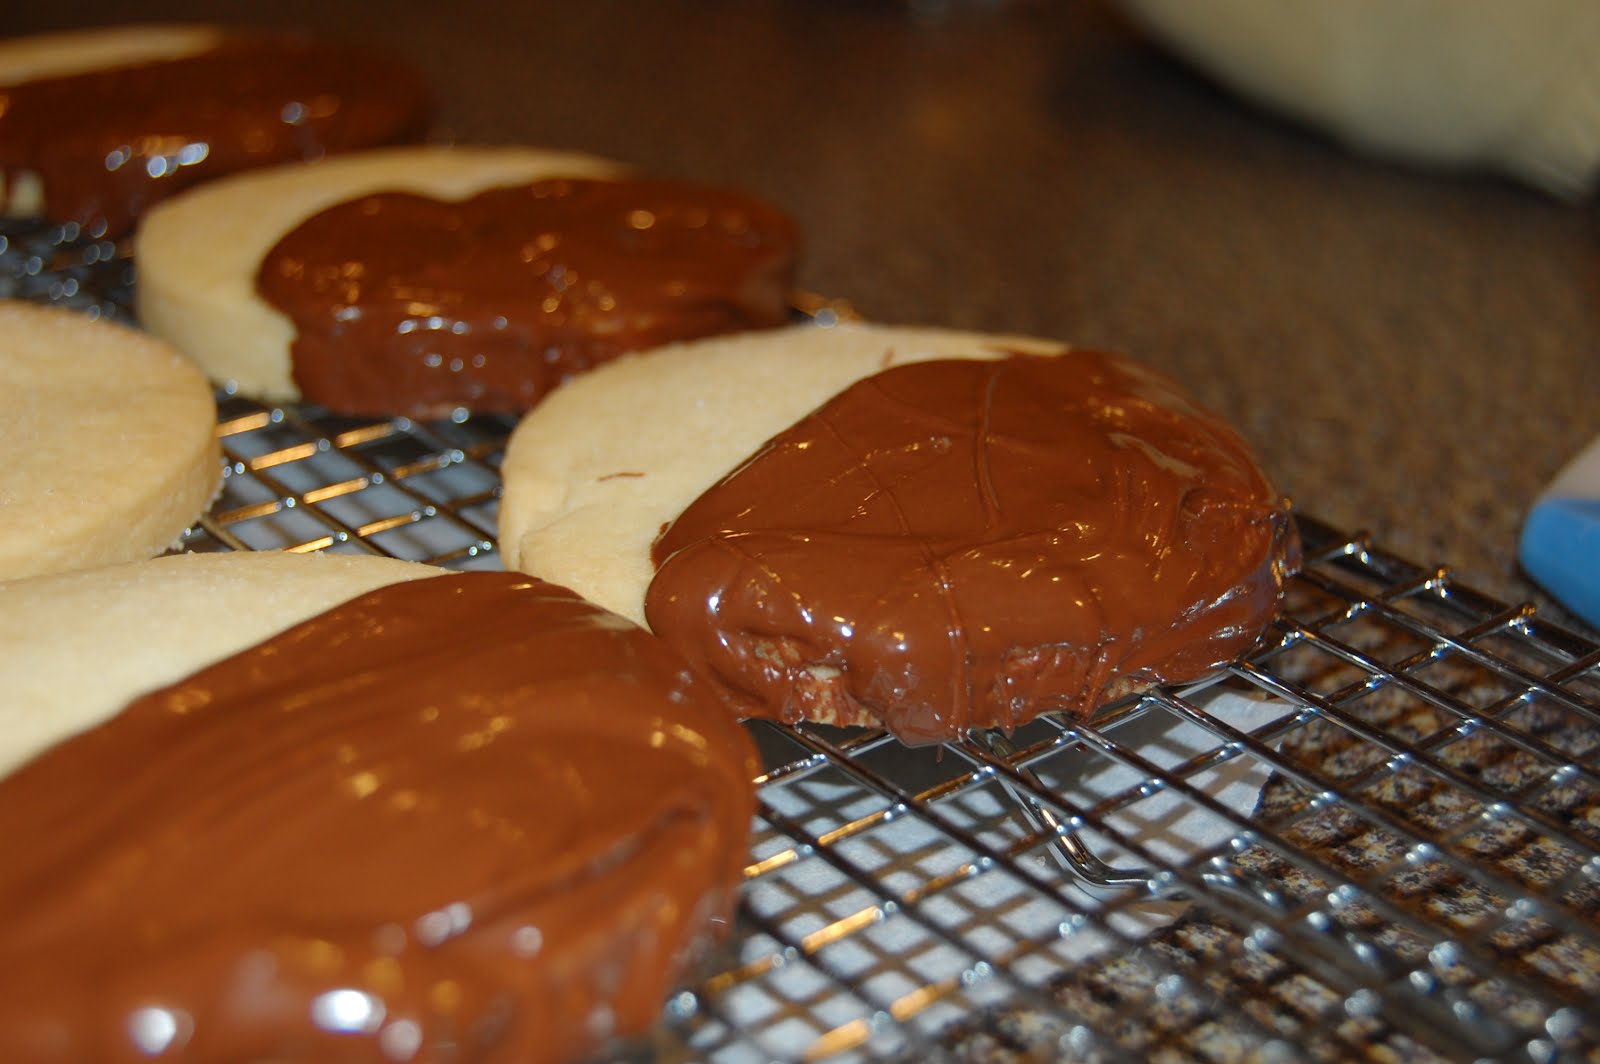 Kitchen Curiosities and more...: Chocolate-Dipped Shortbread Cookies